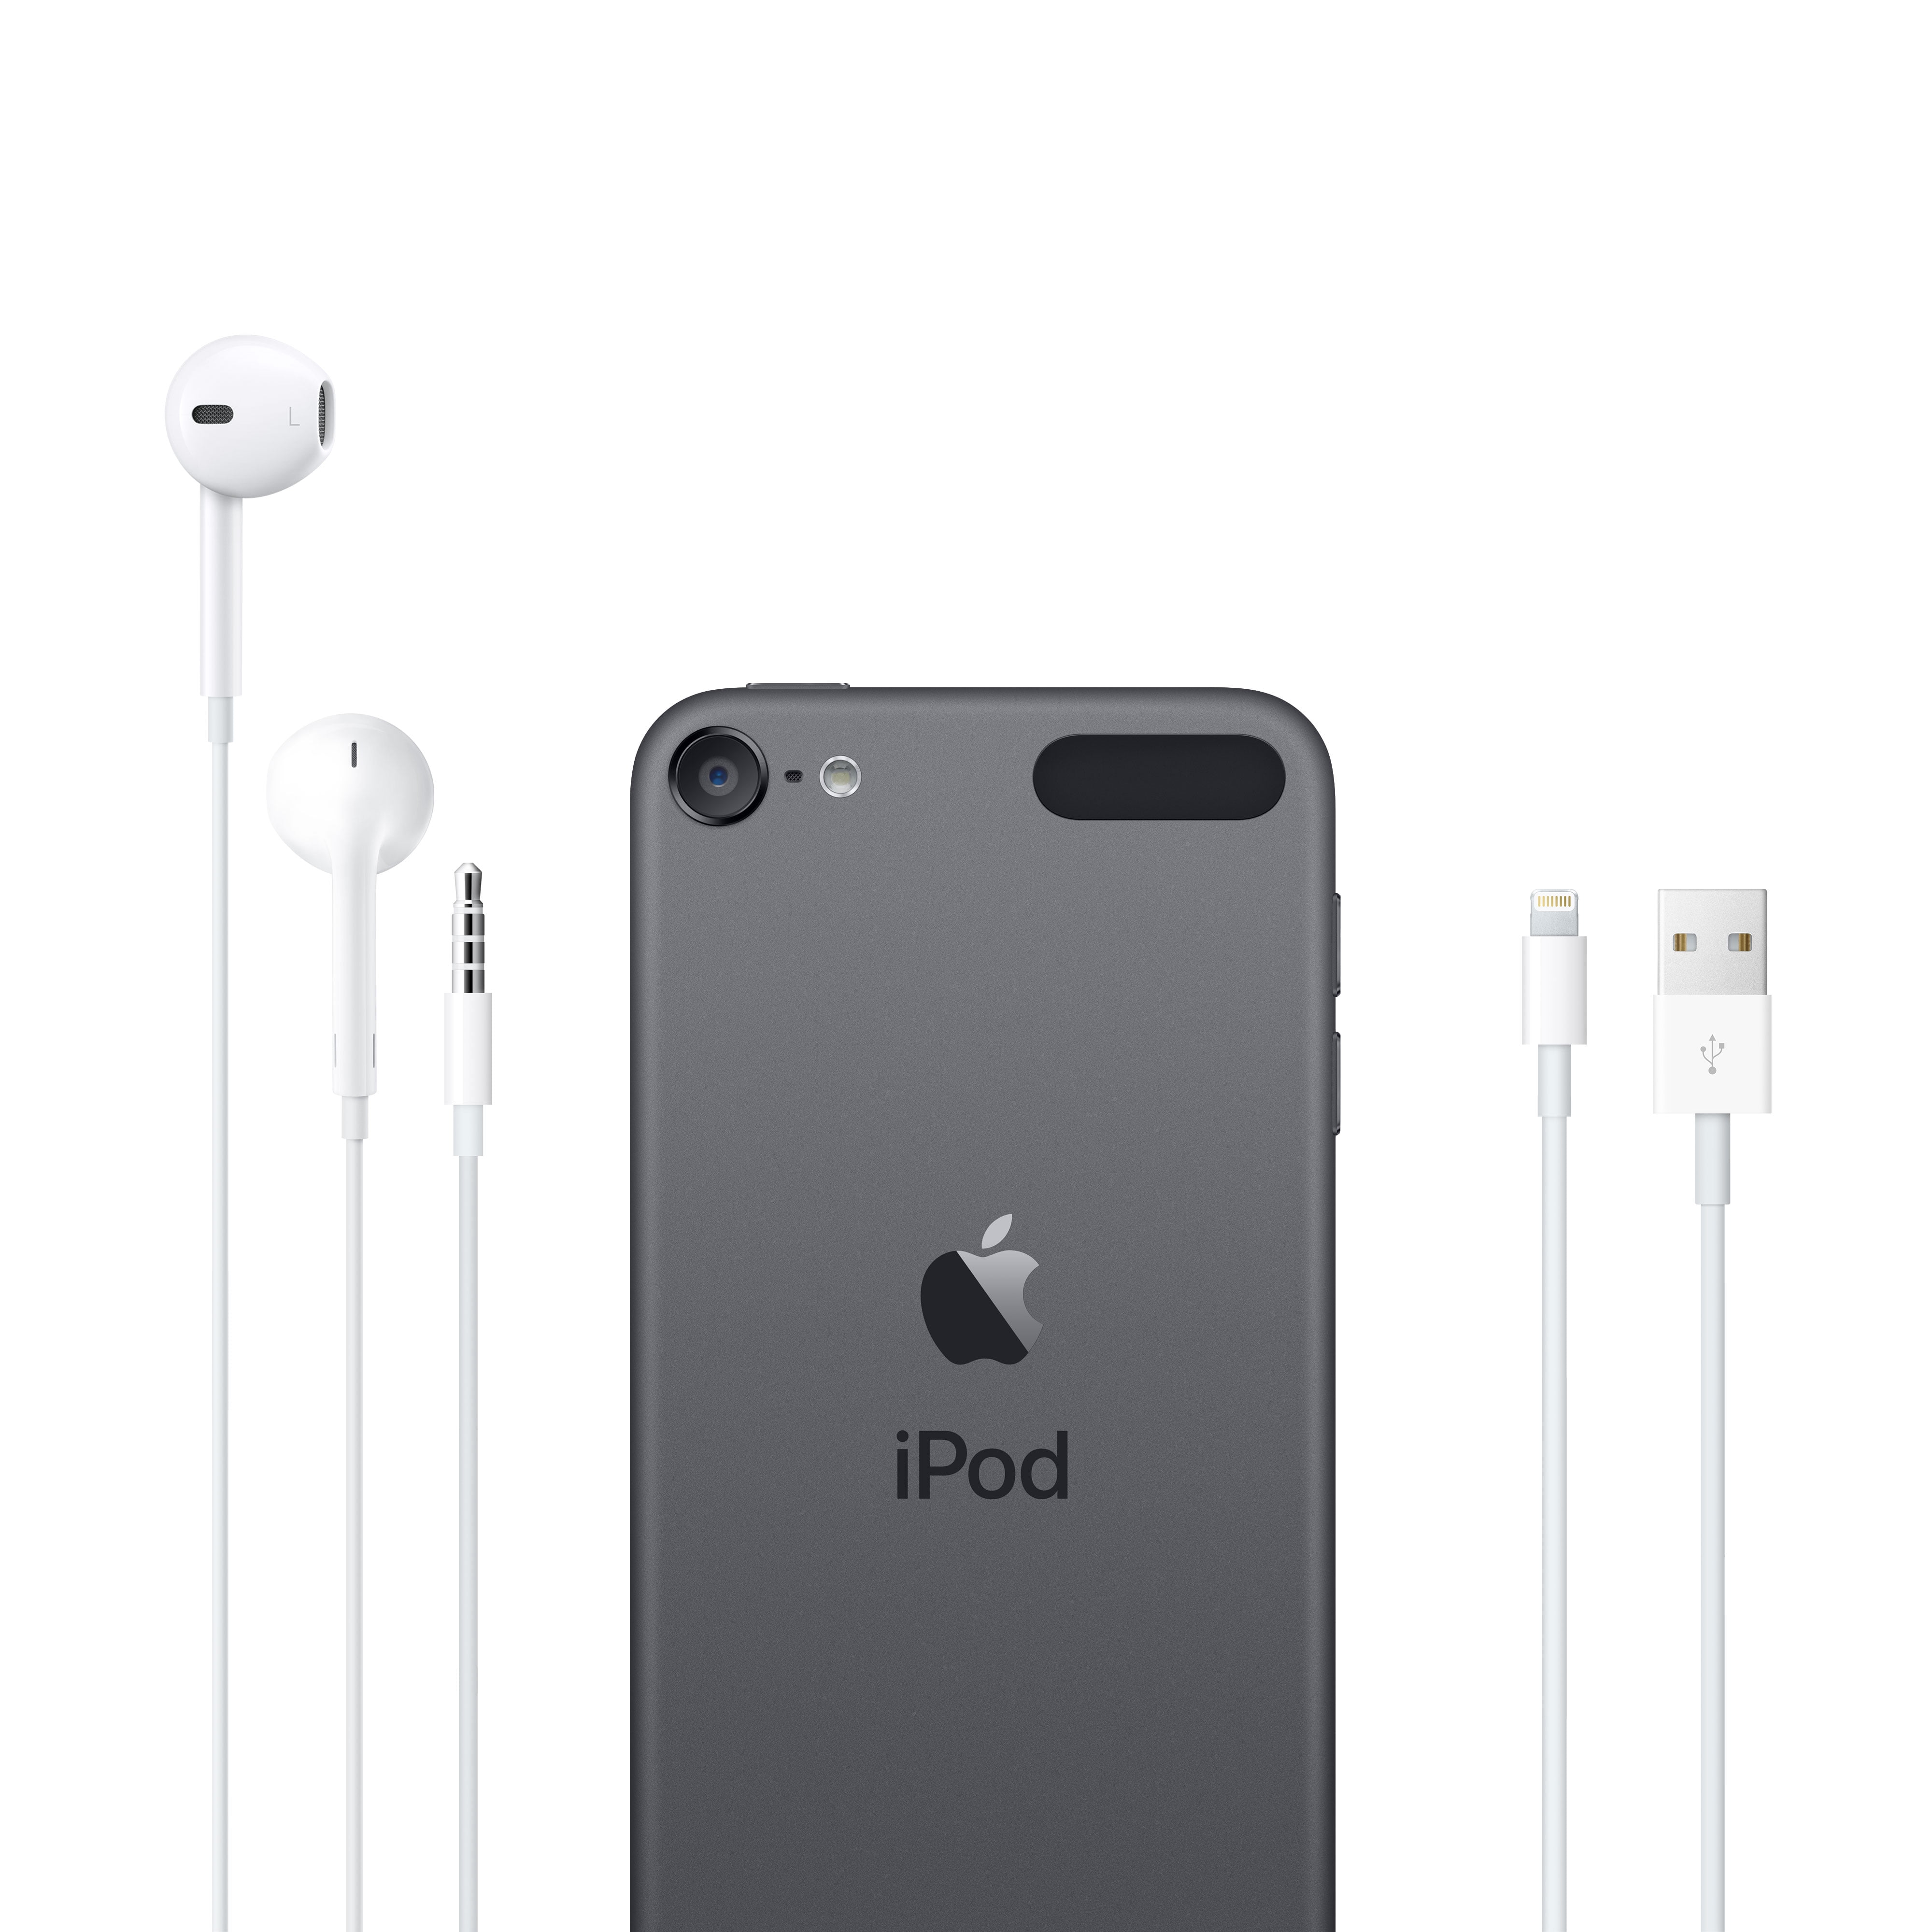 Apple iPod touch 7th Generation 128GB - Space Gray (New Model)